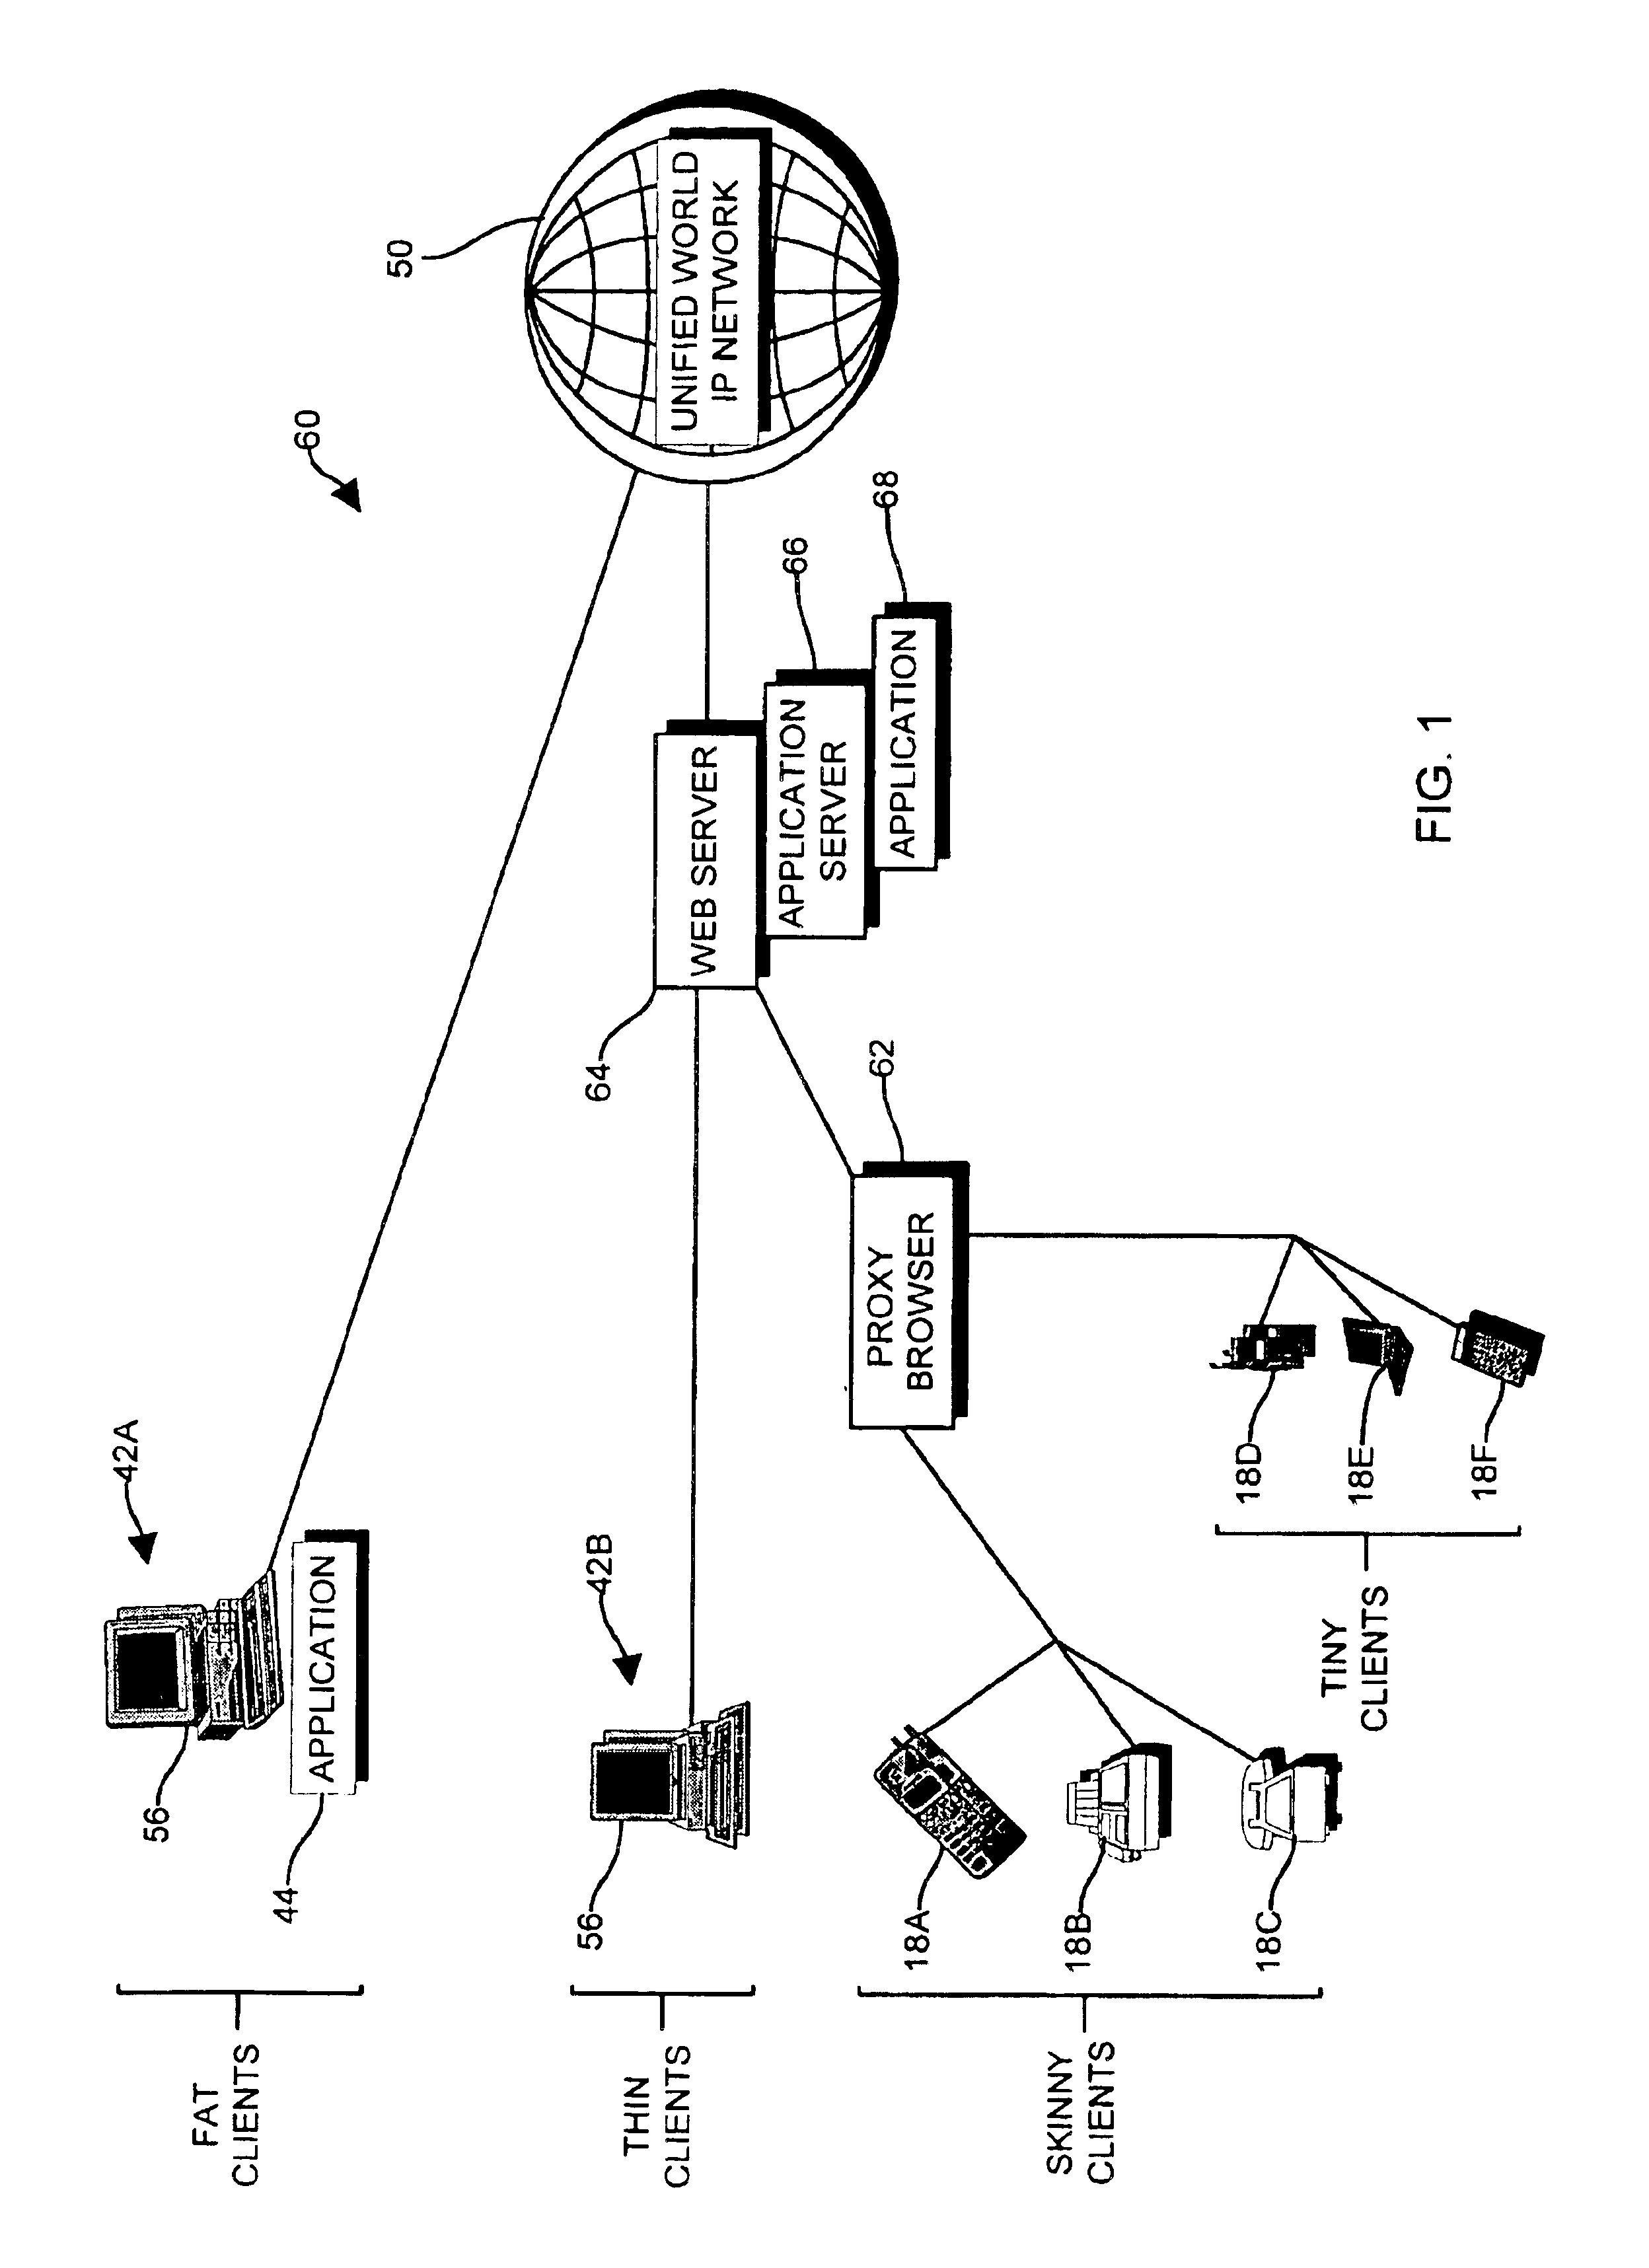 Apparatus and methods for providing an event driven notification over a network to a telephony device